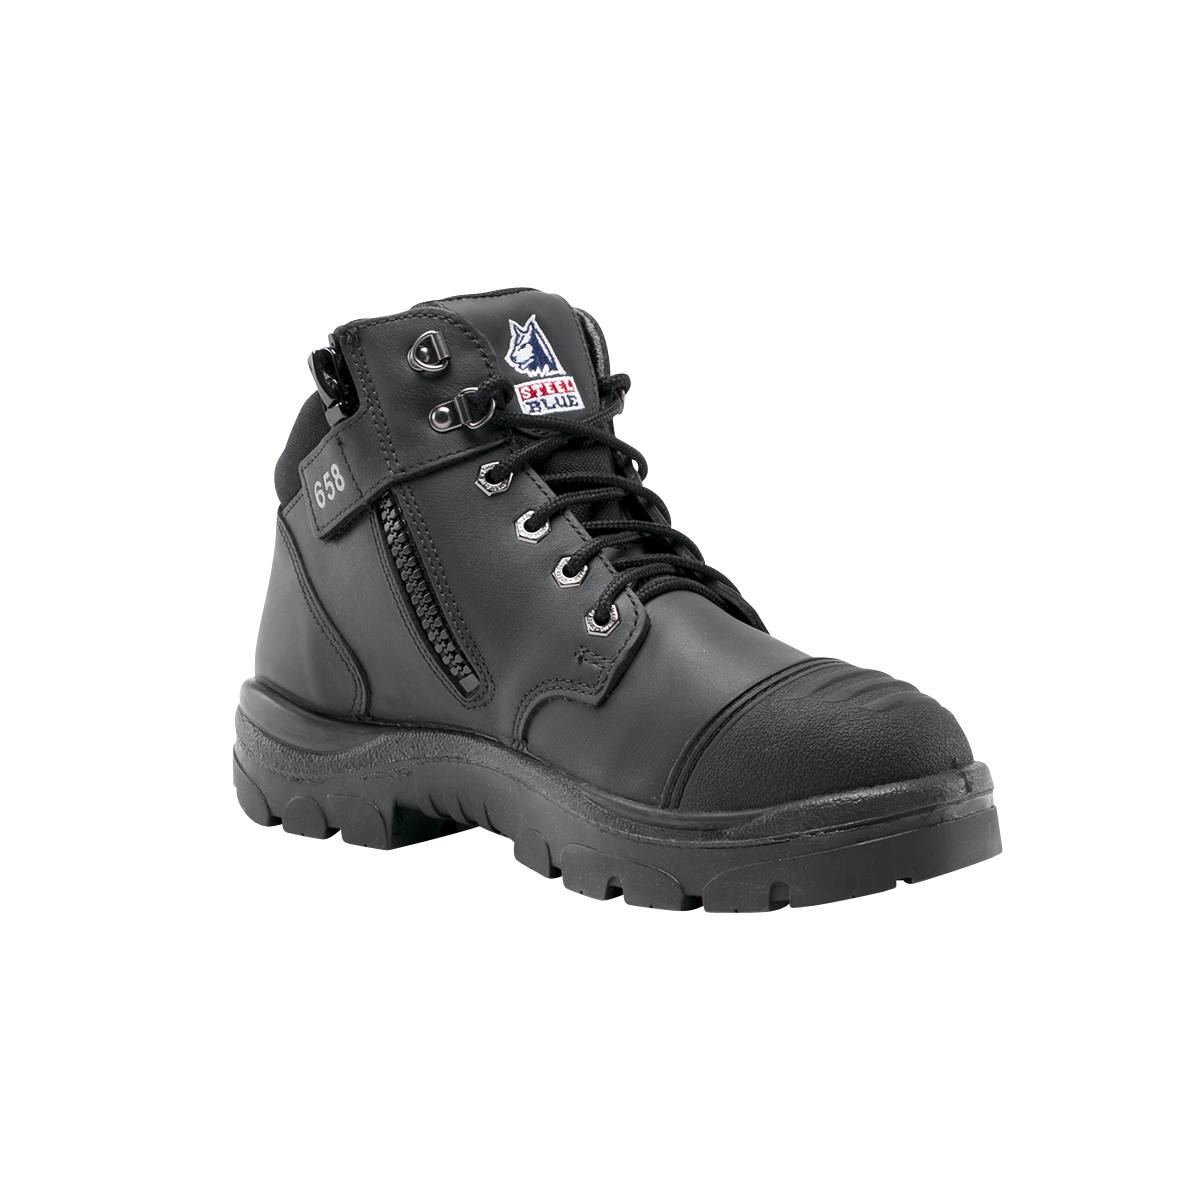 Parkes Zip S3 Safety Boots